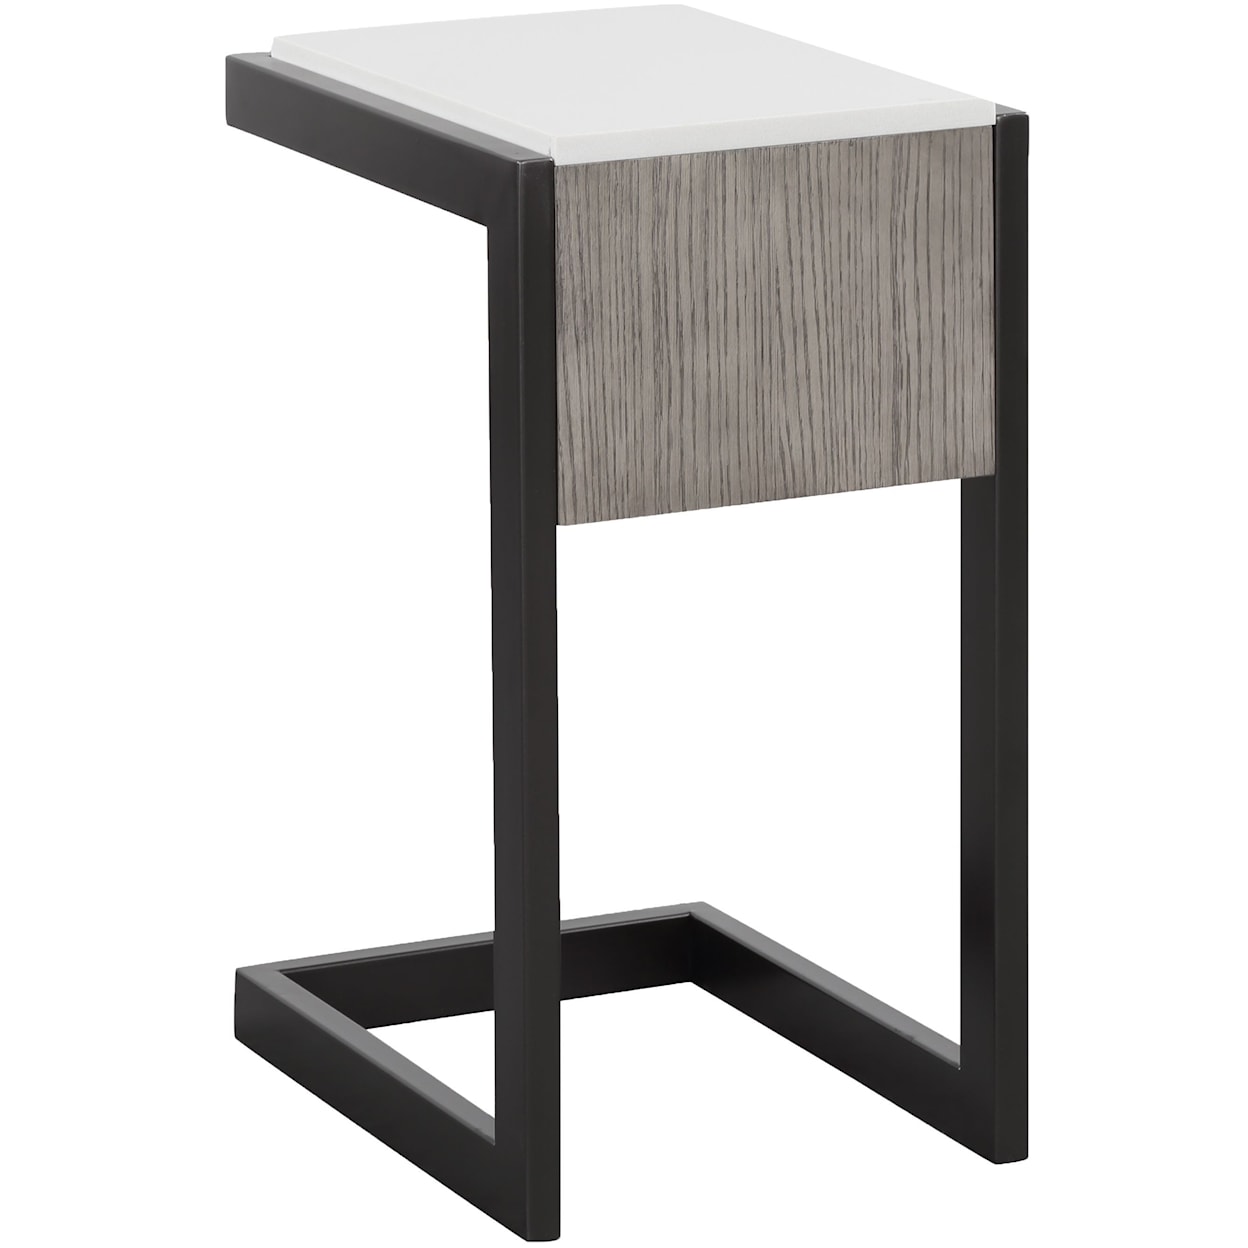 Paramount Furniture Pure Modern Chairside Table with Quartz Top